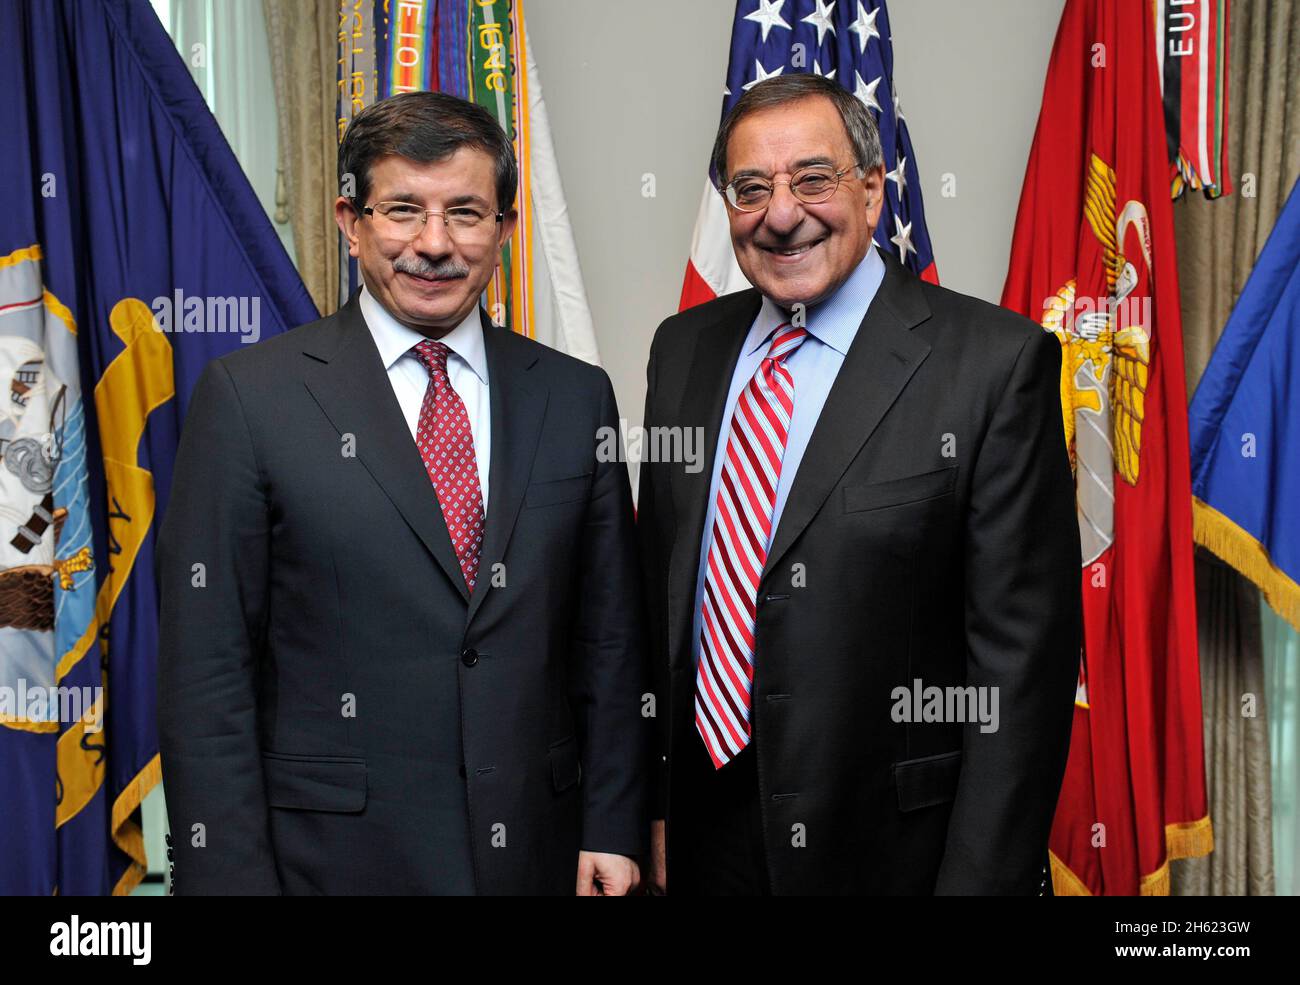 Secretary of Defense Leon E. Panetta, right, meets with Ahmet Davutoglu, the Turkish minister of foreign affairs, at the Pentagon Feb. 13, 2012. Stock Photo